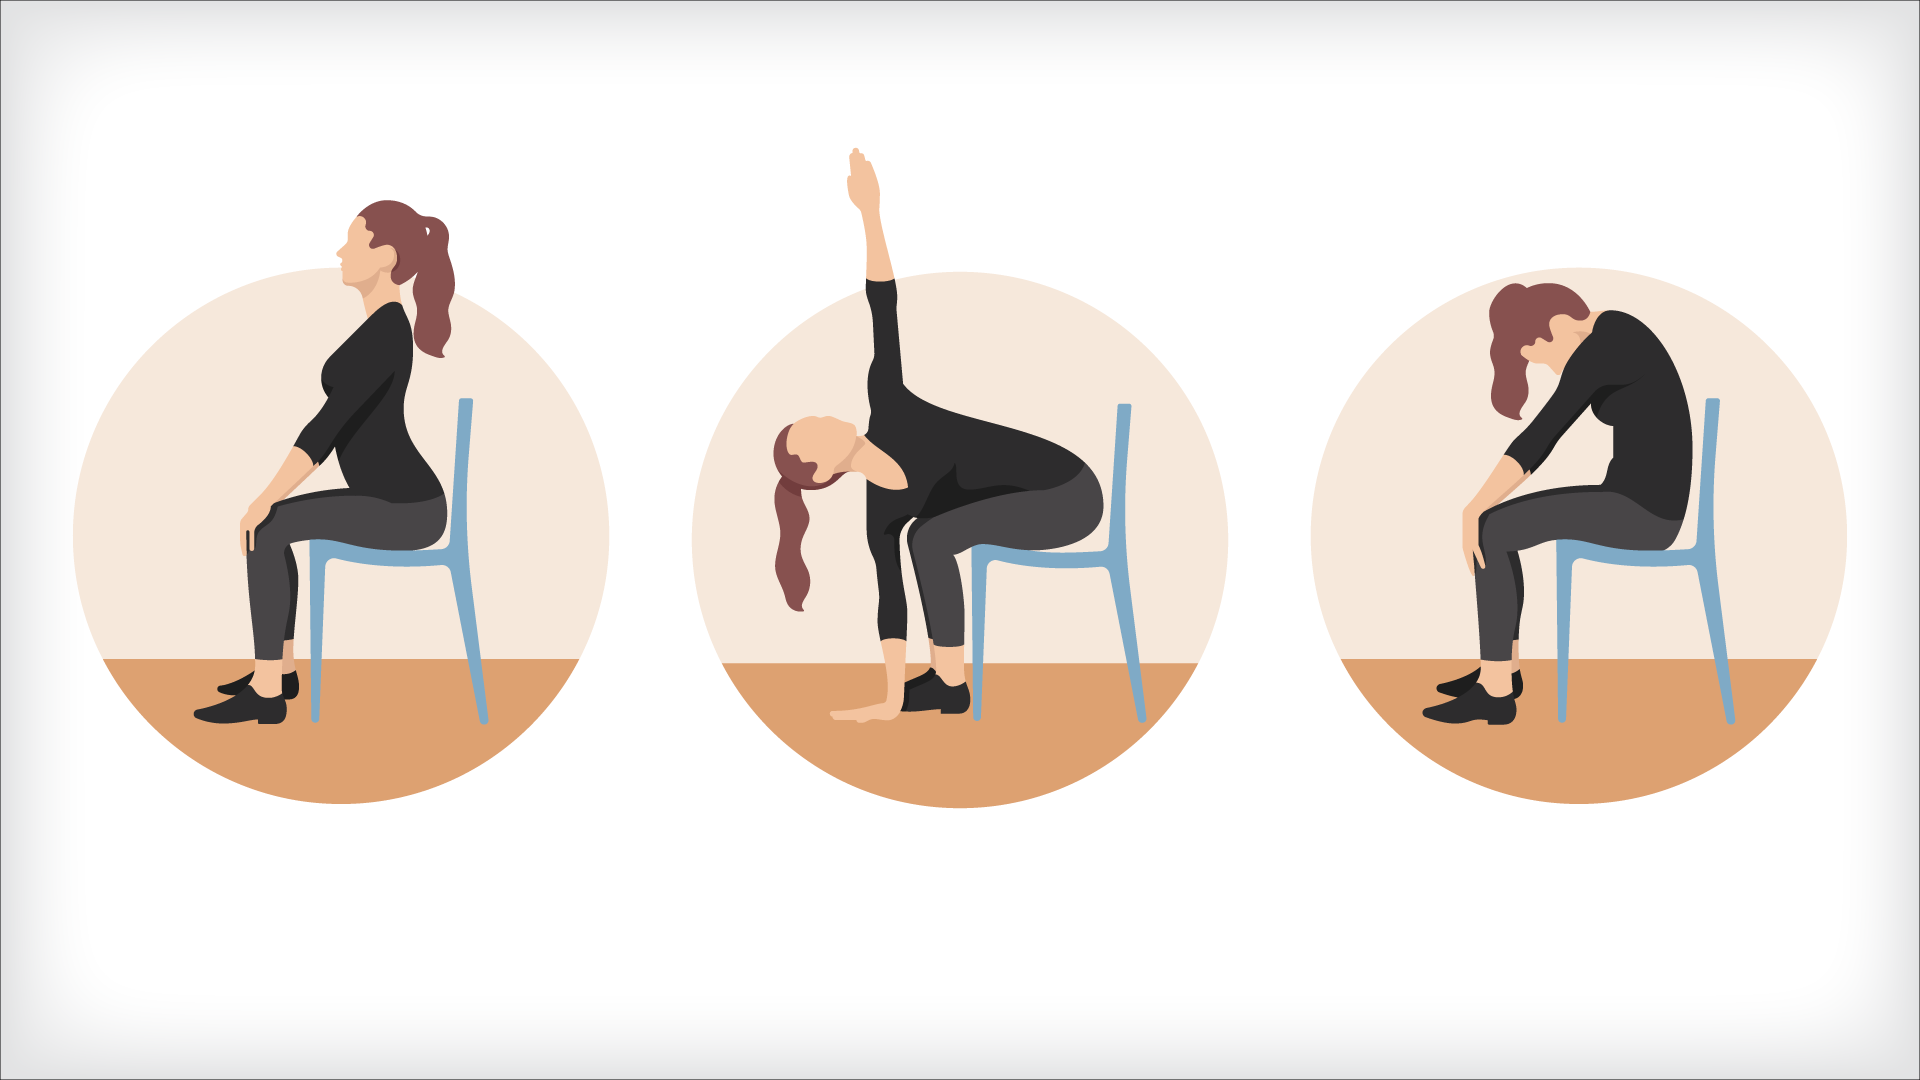 3 Chair Yoga Poses For All Fitness Levels this Monday